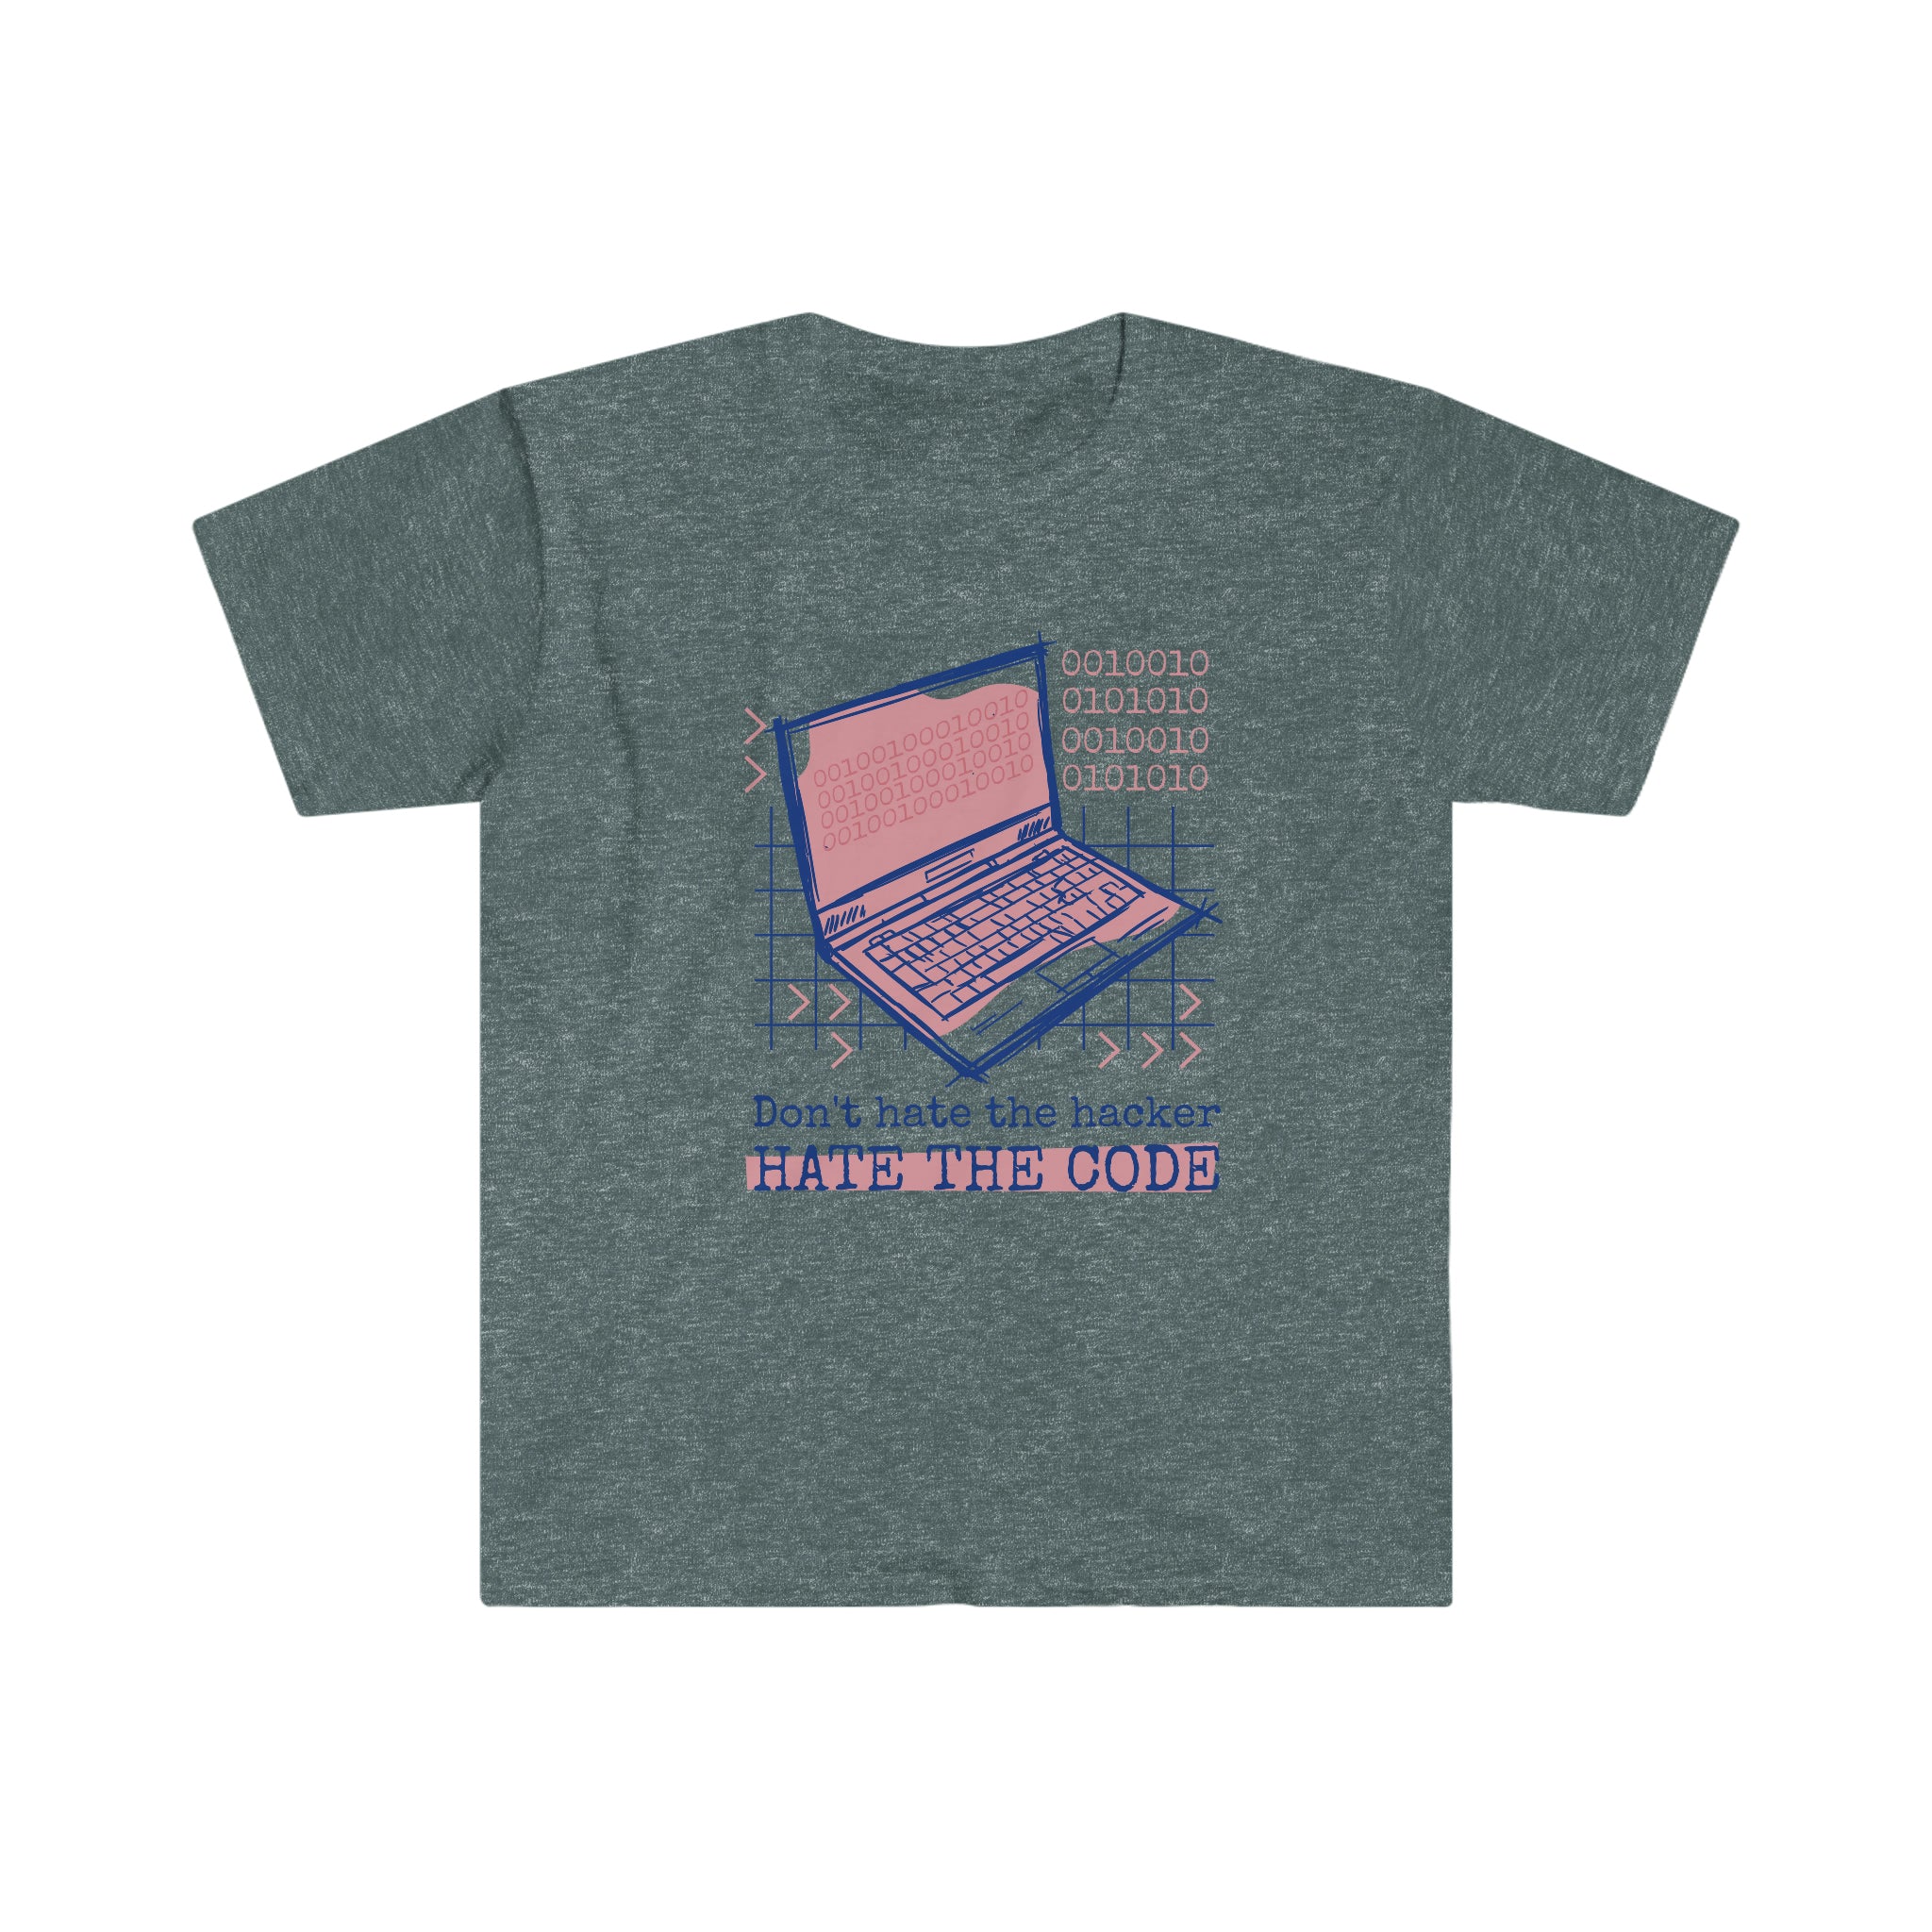 Gray shirt with a graphic of coding books and binary code, featuring the phrase "Don't Hate the Hacker".